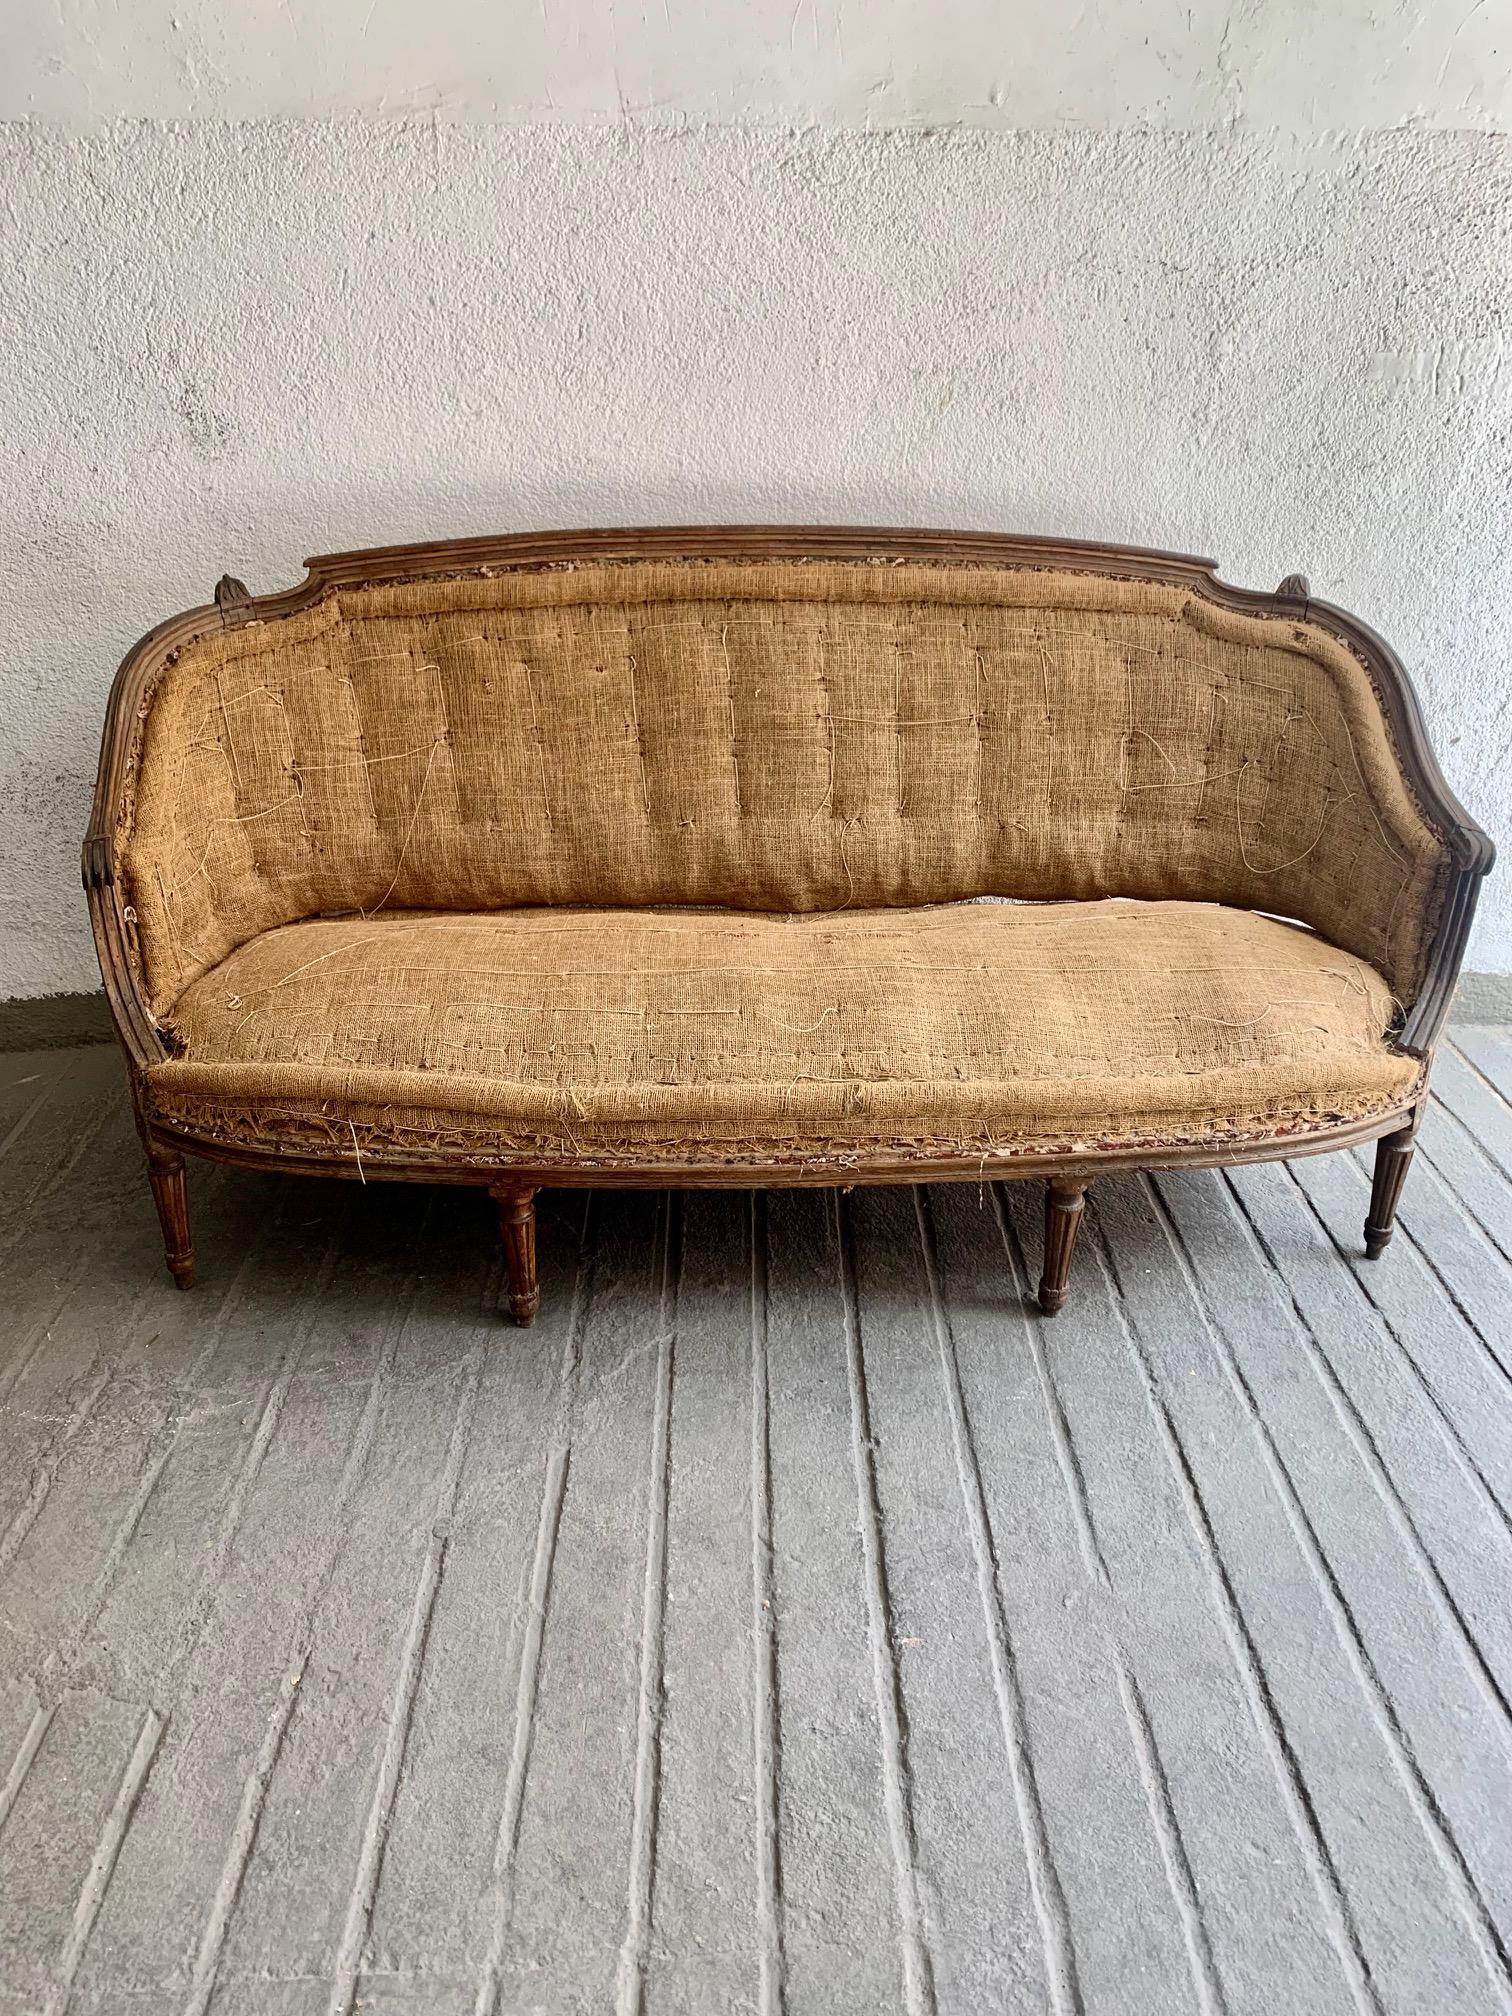 A Louis XVI period settee in carved walnut corbeille from the late 18th century, with a slightly enveloping back, characteristic of this period. topped with a few floral spikes. Created in France during the last quarter of the 18th century, this